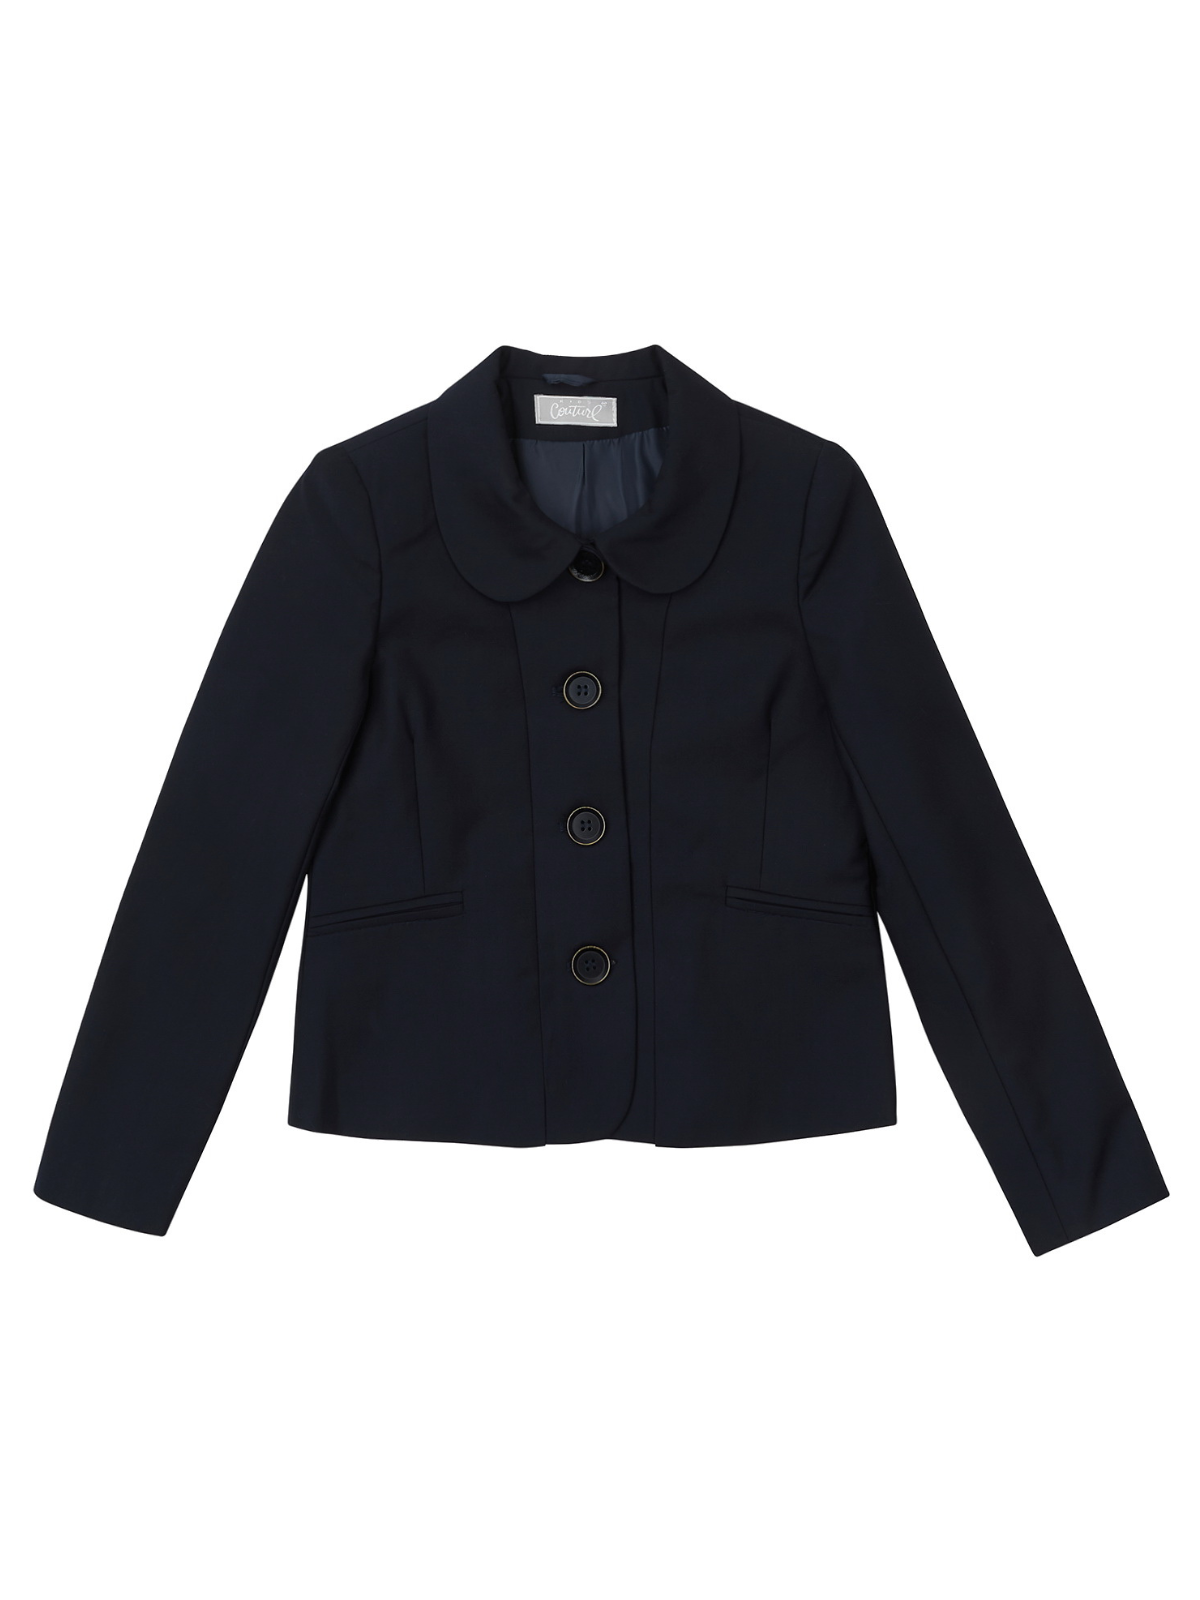 Refined Peter Pan Collar Navy Blazer by Kids Couture